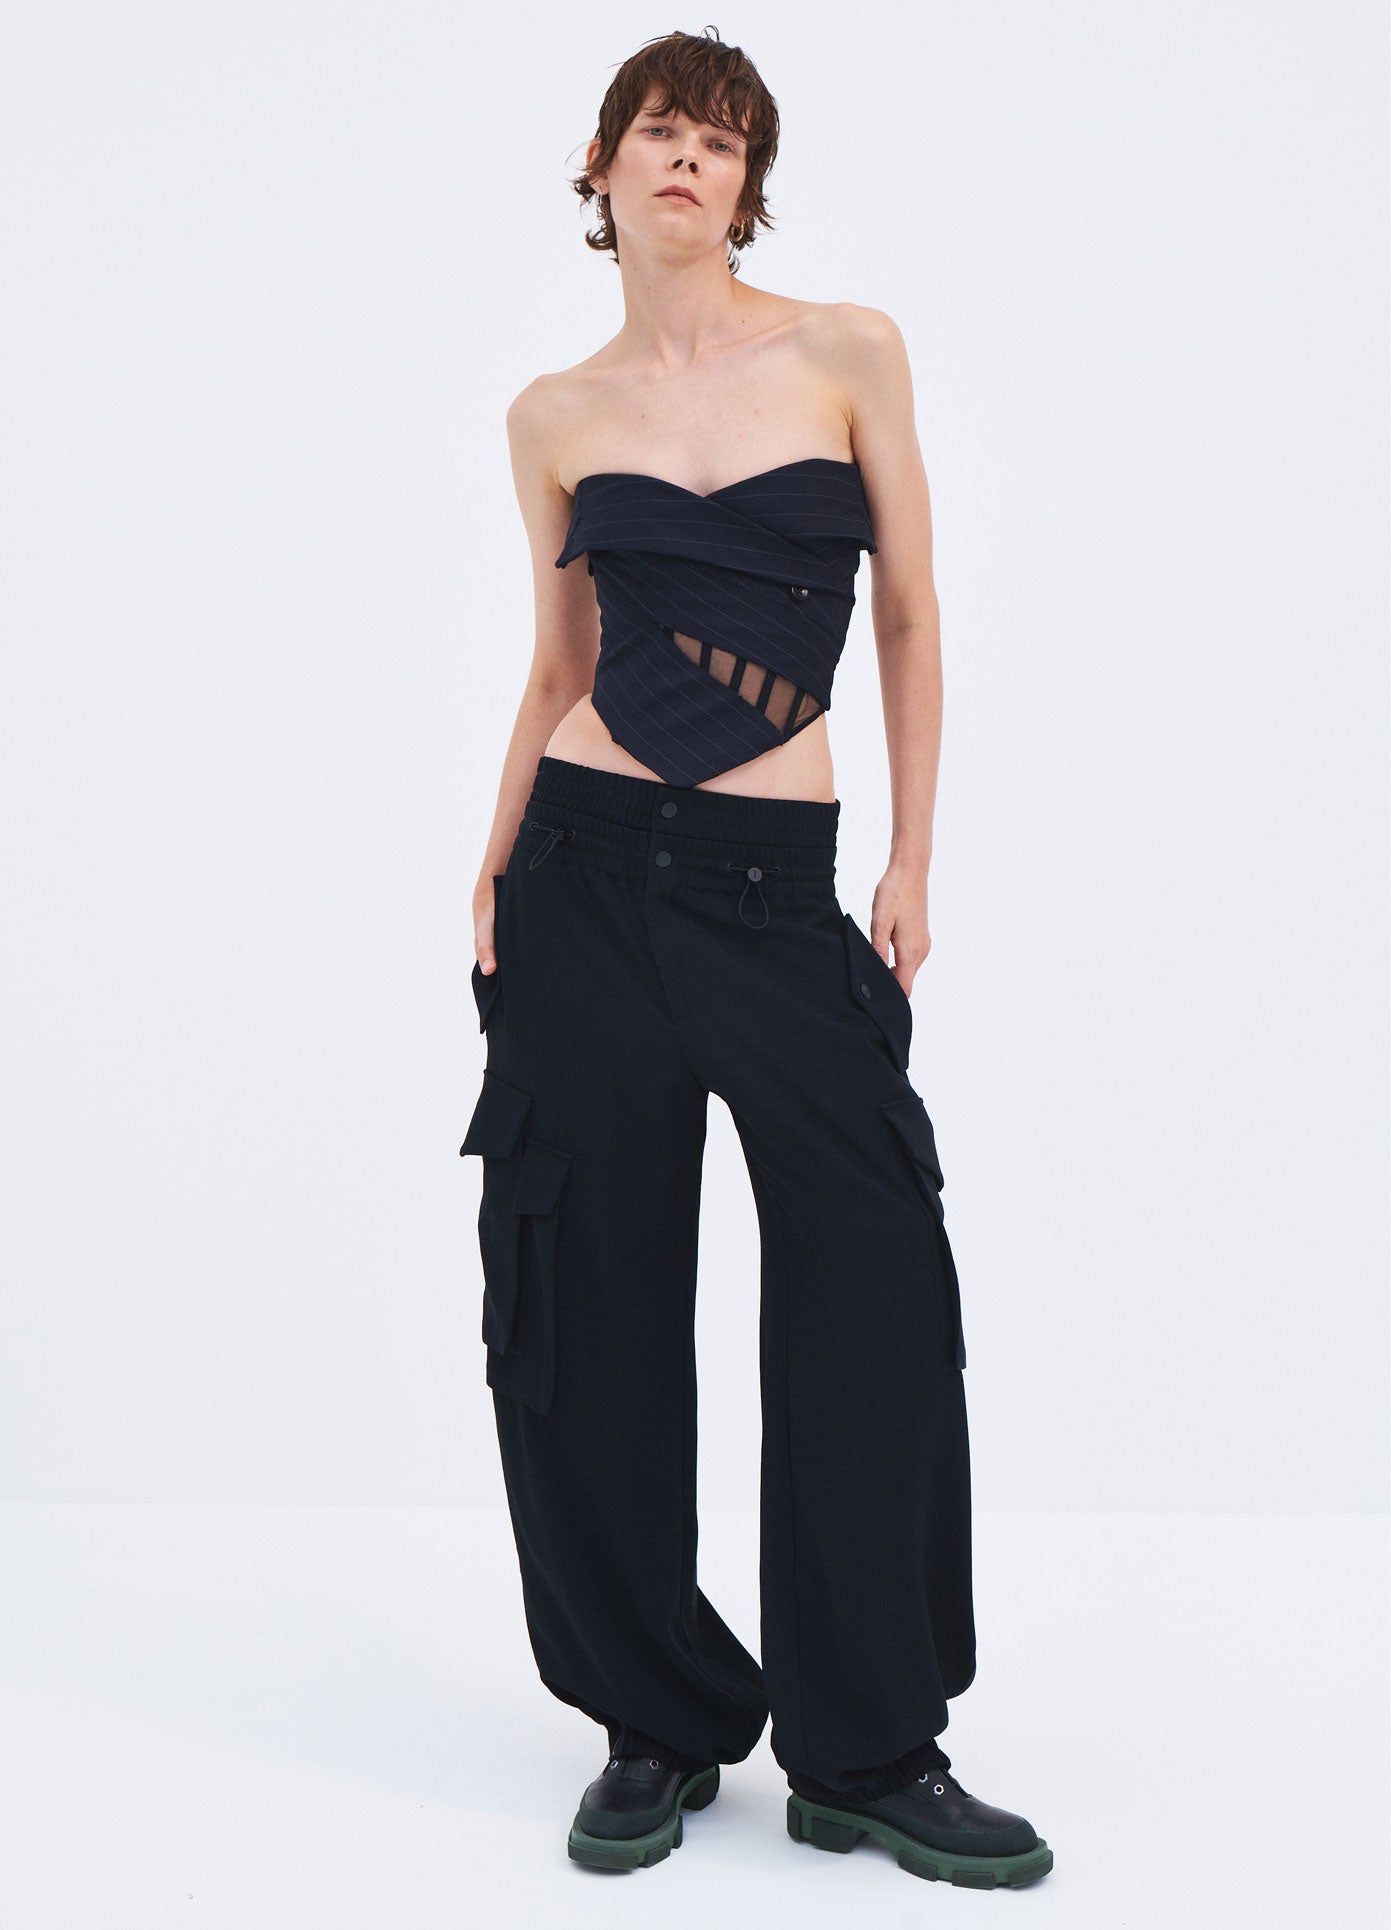 MONSE Spring 2024 Double Waistband Cargo Pants in Black on model full front view